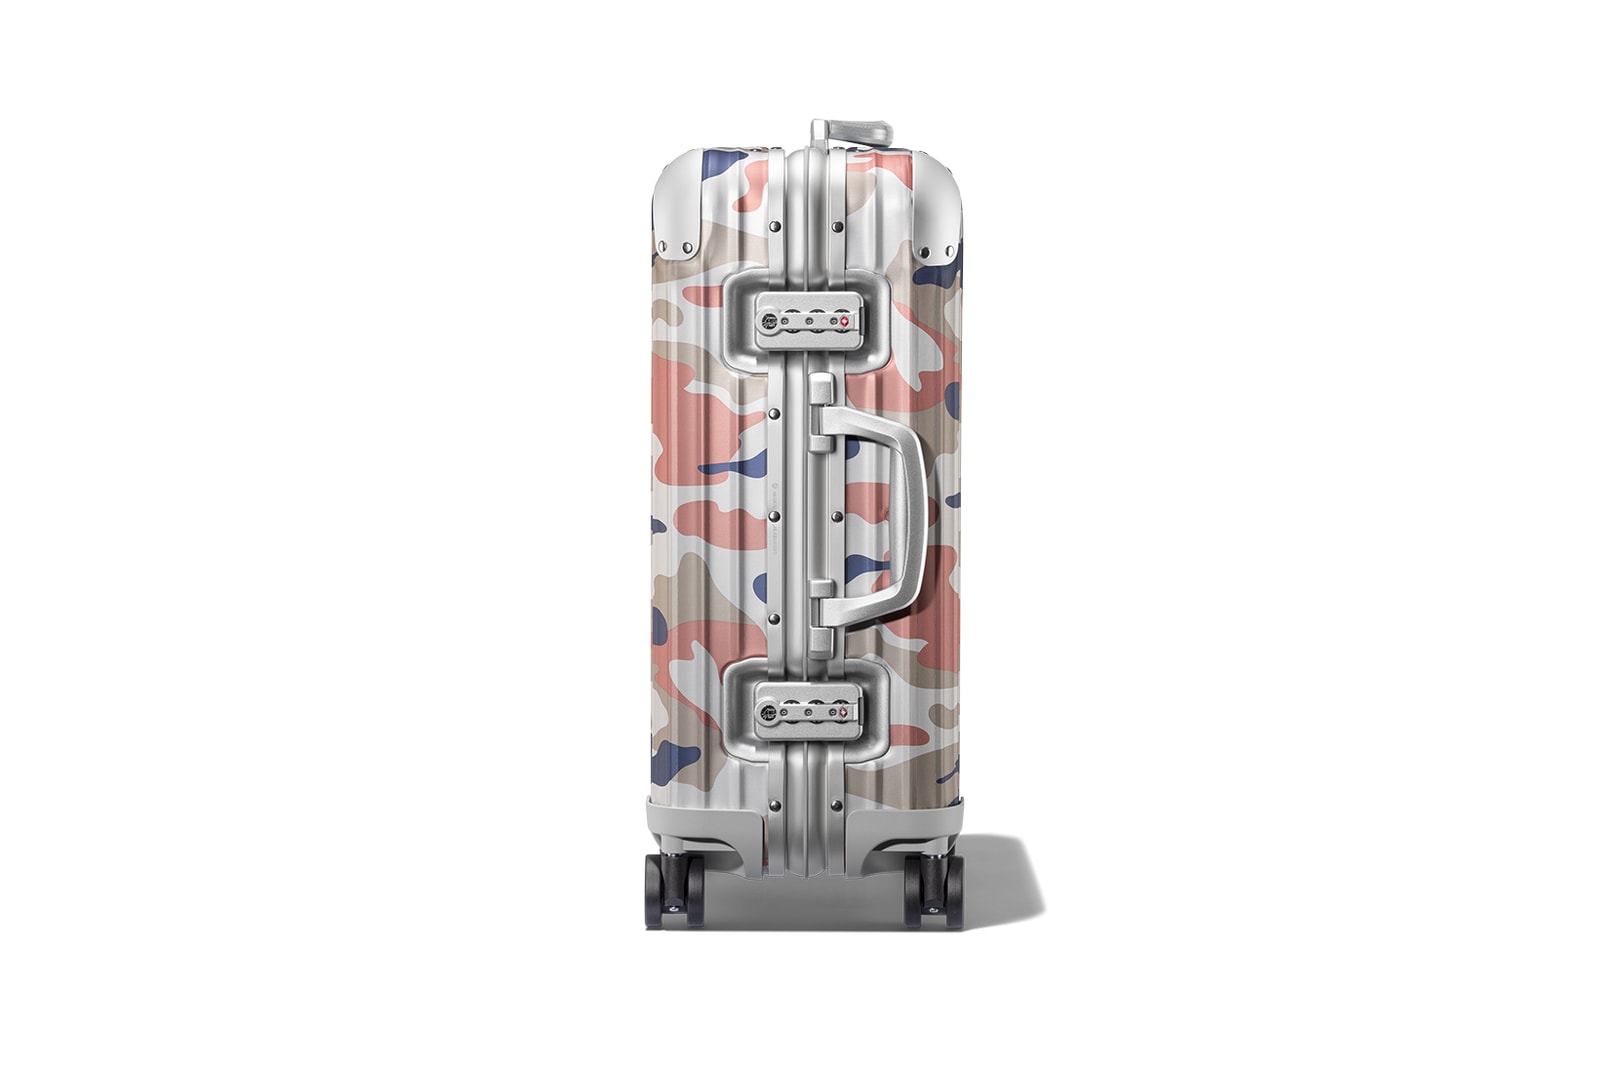 rimowa original aluminium suitcase luggage camouflage limited edition cabin green pink colorway